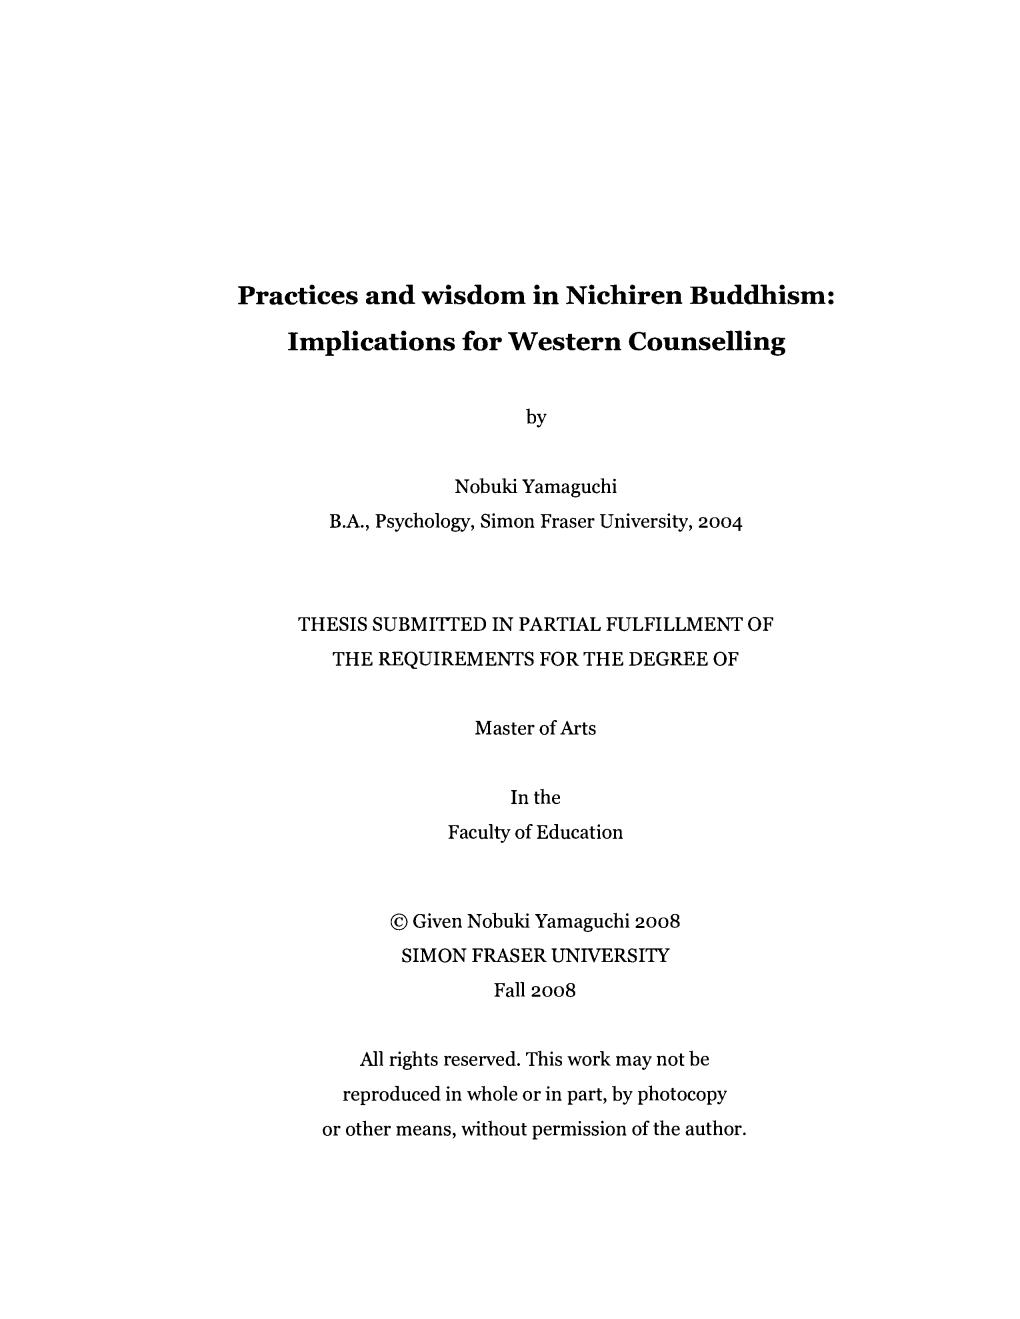 Practices and Wisdom in Nichiren Buddhism: Implications for Western Counselling